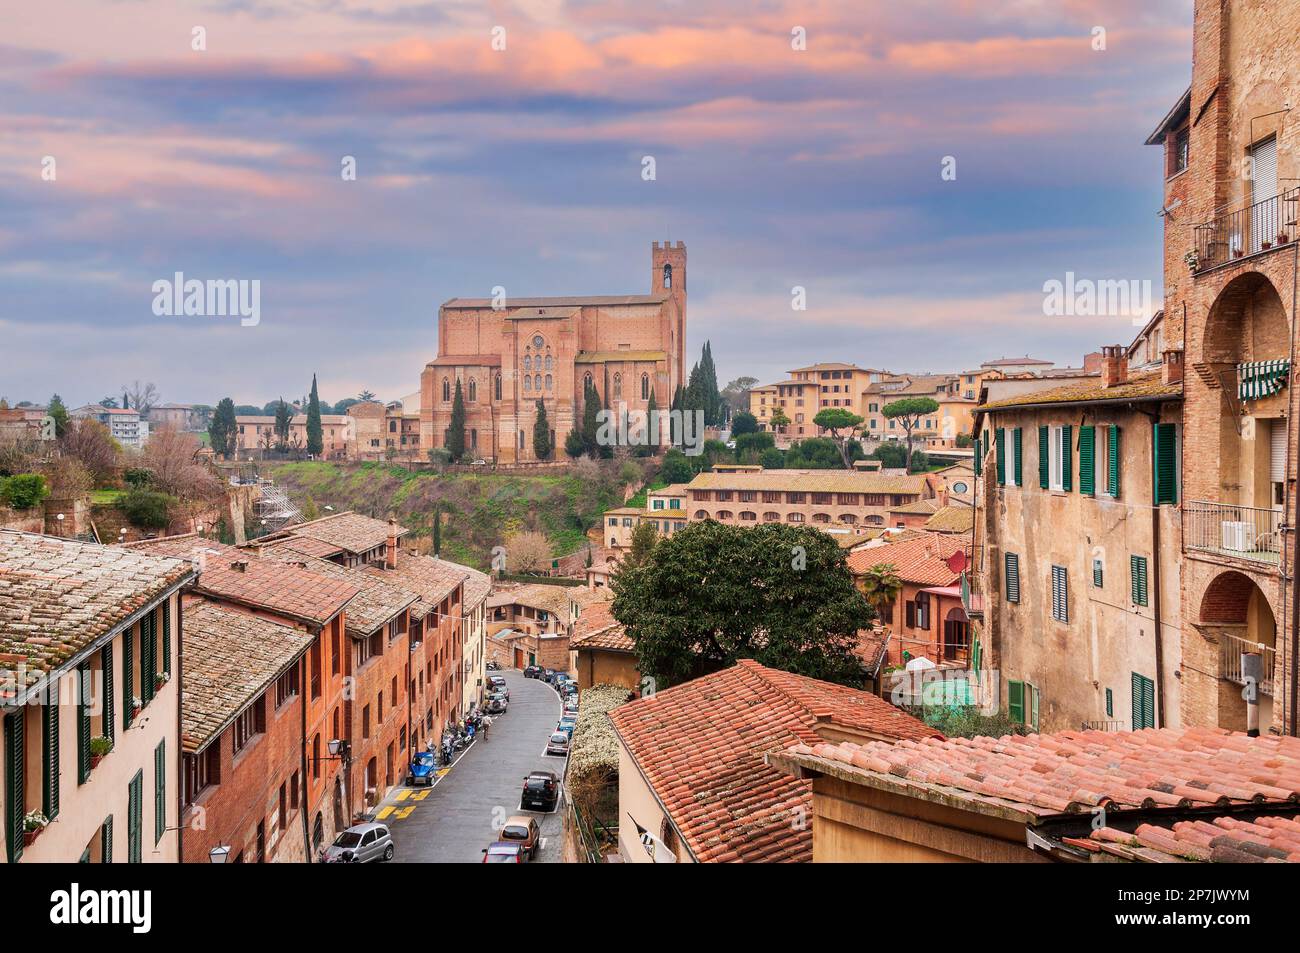 Panorama of the city of Siena and the Basilica of San Domenico under a stormy and very busy sky, in Tuscany, Italy Stock Photo